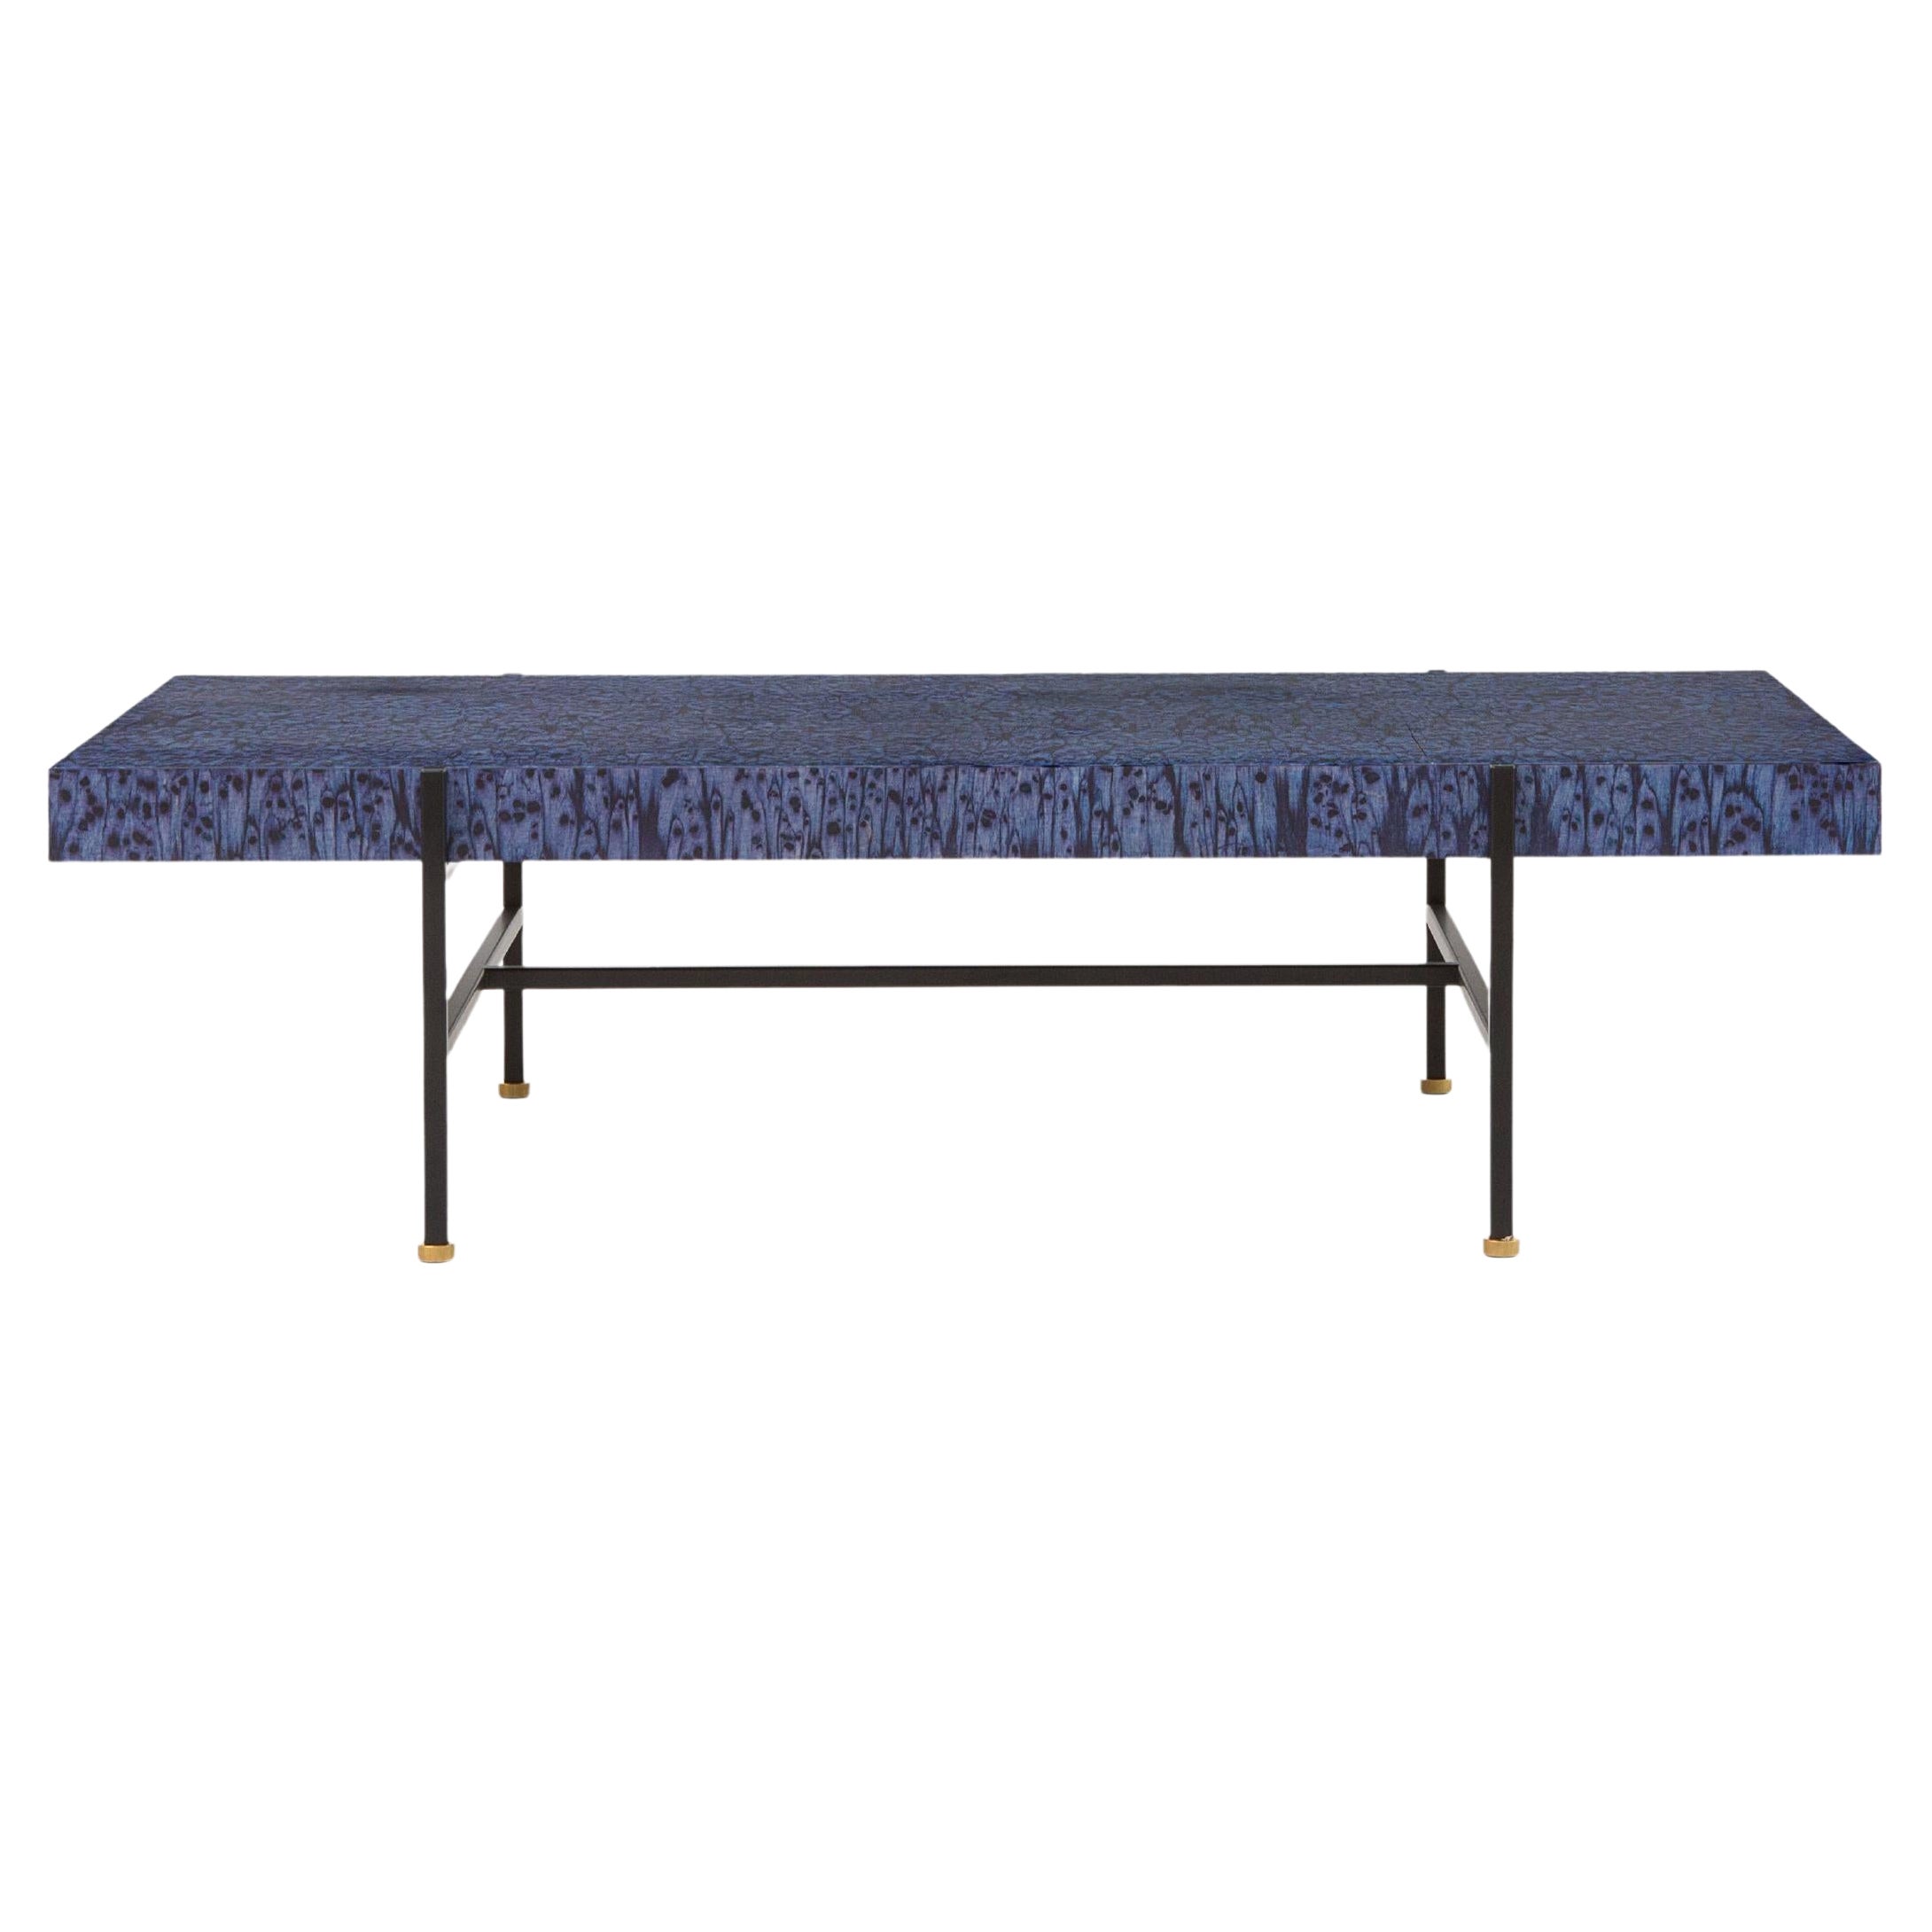 Purple Osis Bensimon Low Table by Llot Llov For Sale